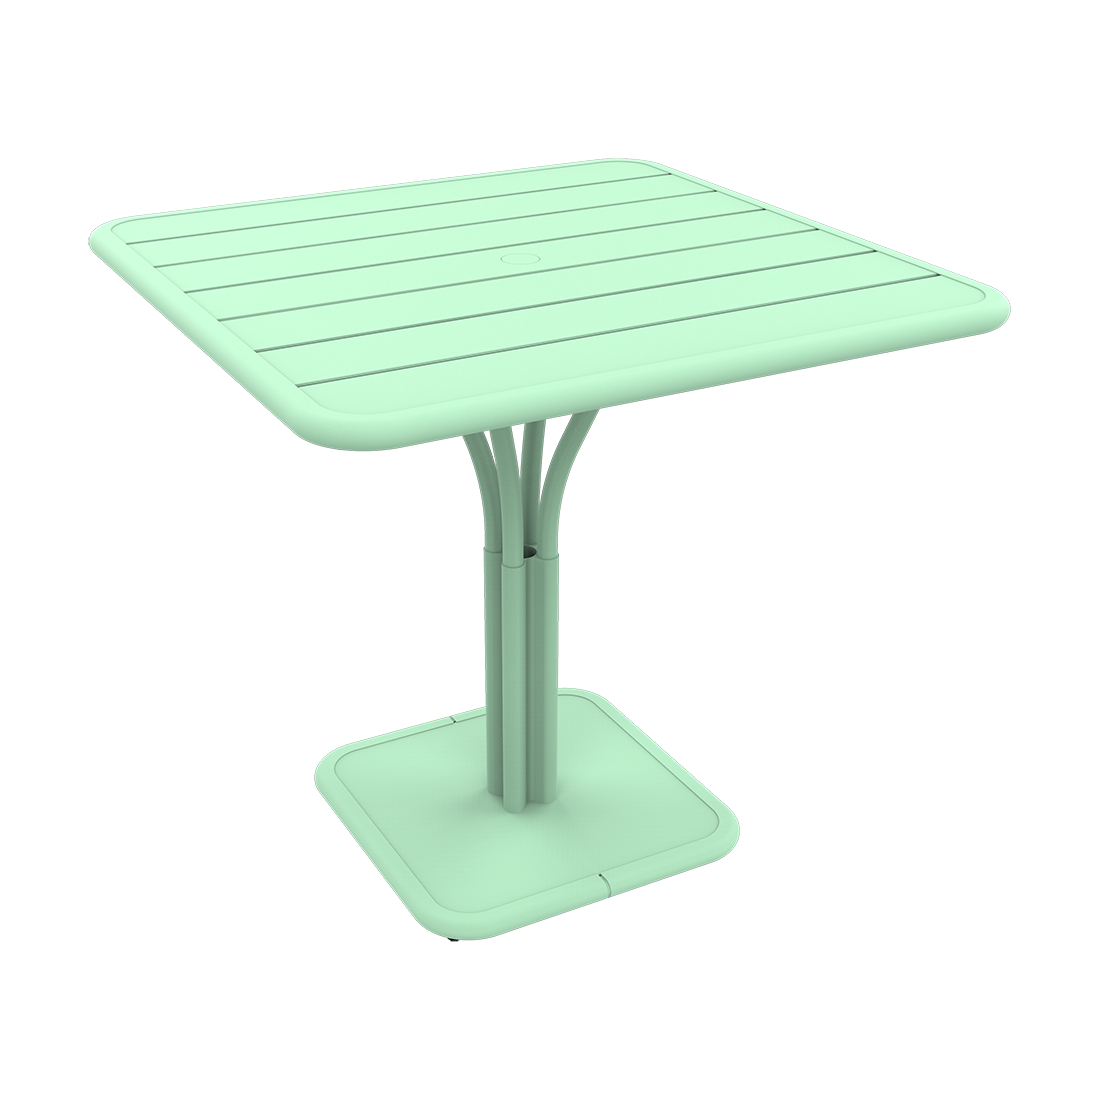 LUXEMBOURG PEDESTAL TABLE 80 X 80 CM